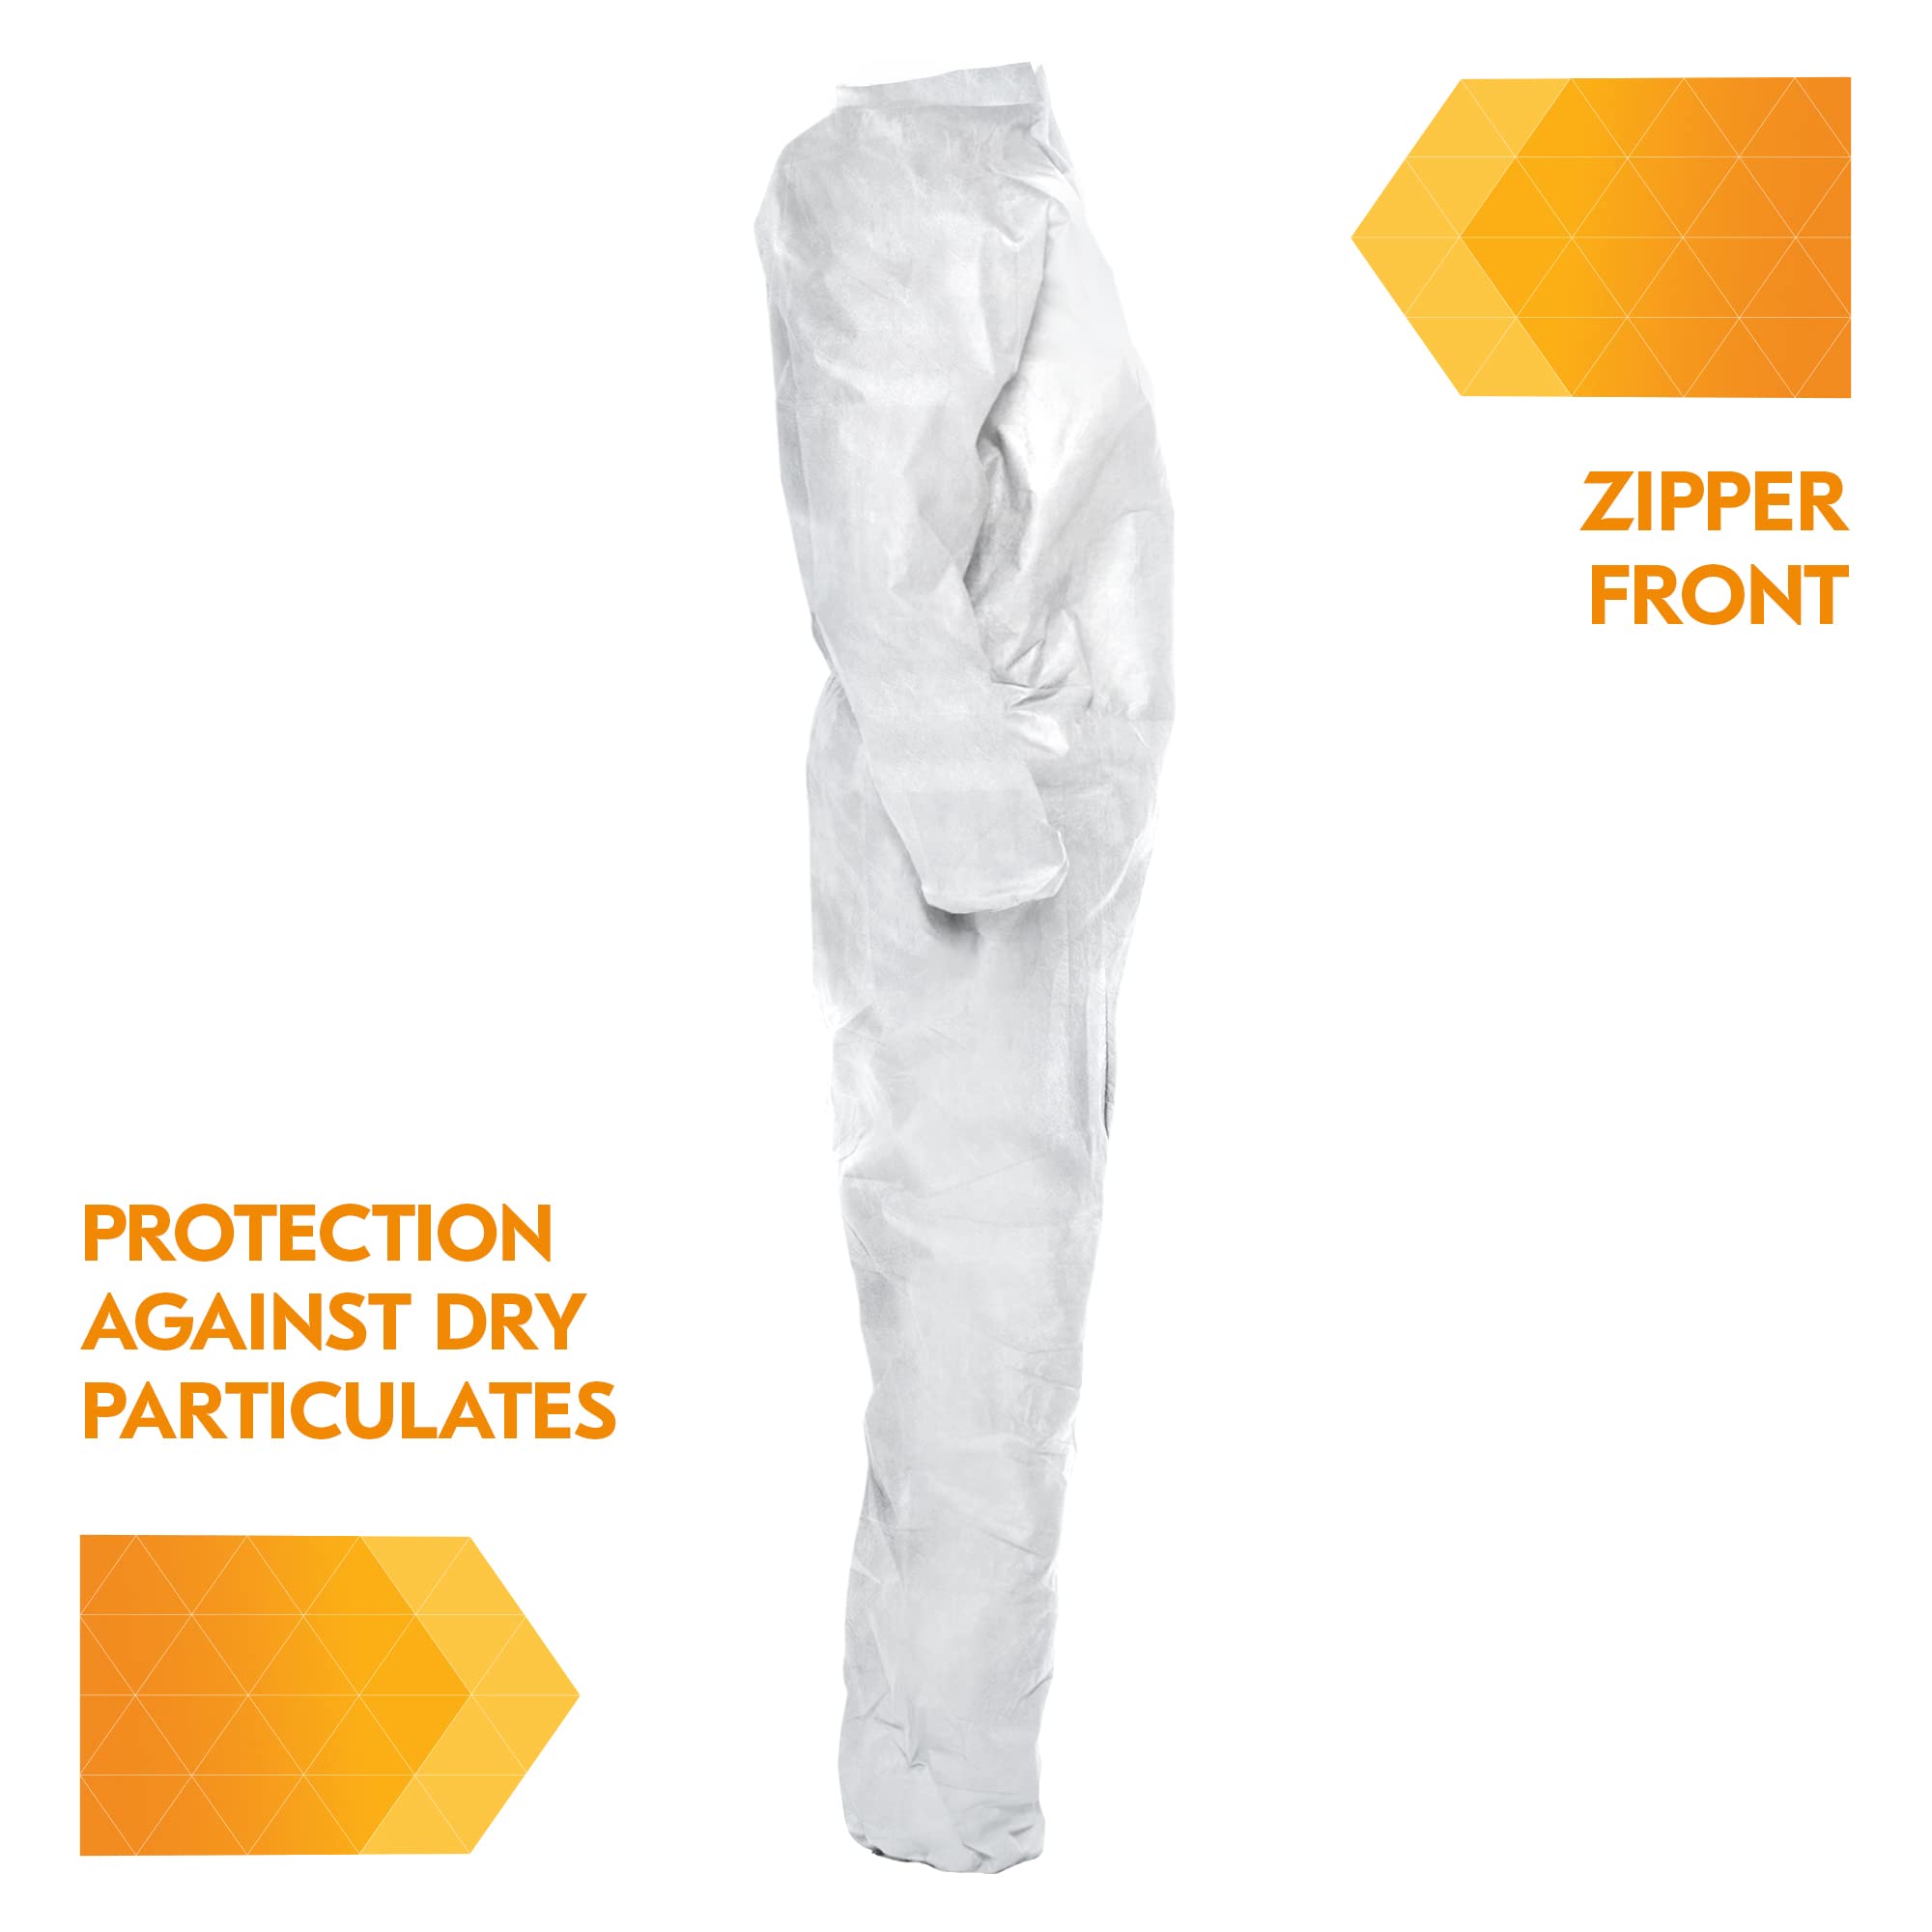 KleenGuard A20 Elastic Wrist and Ankle Coverall, 2X, White (37718), REFLEX Design, Zip Front